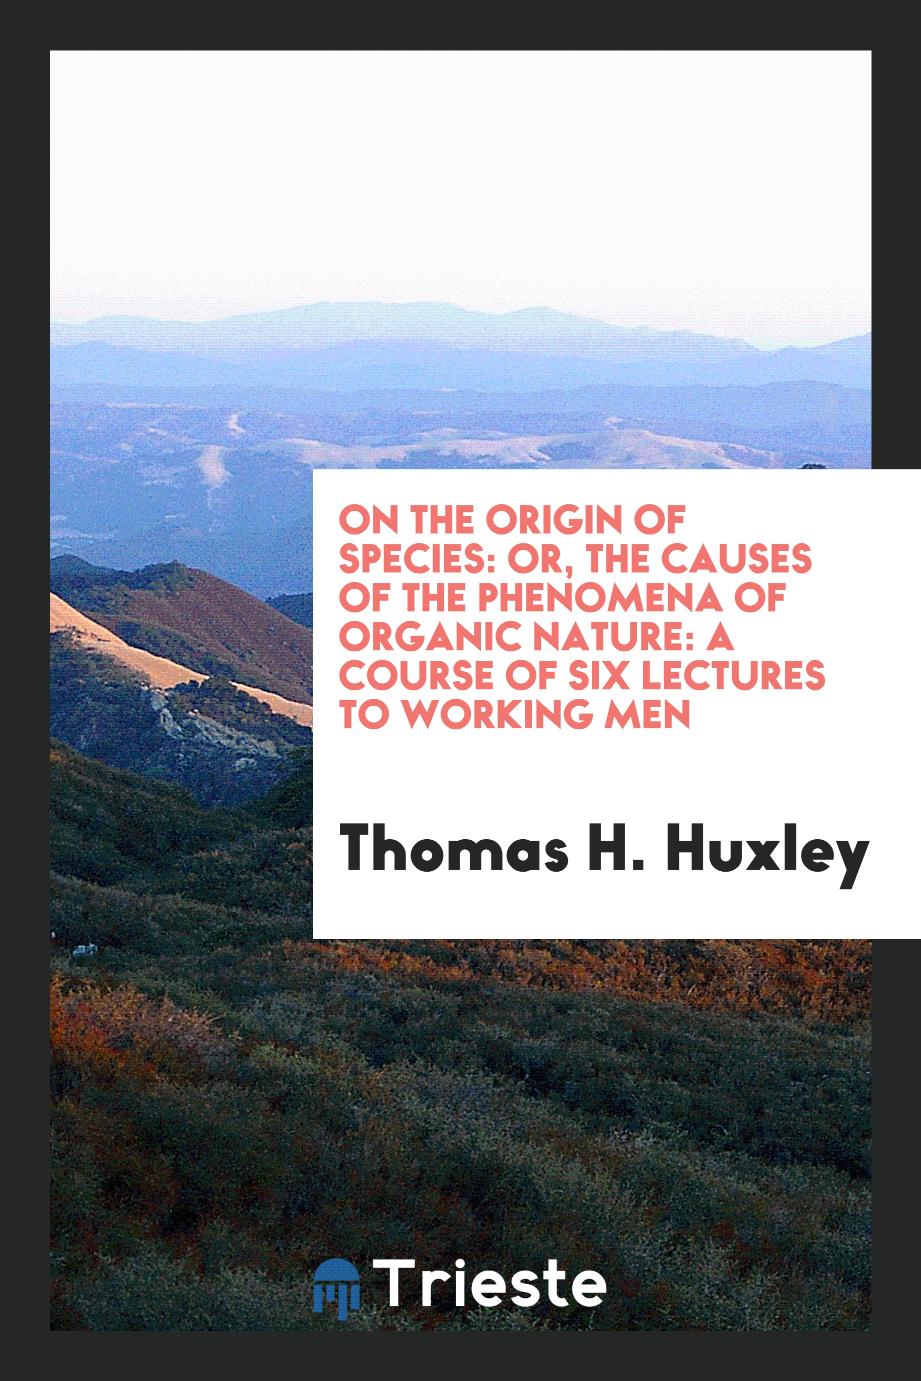 On the Origin of Species: Or, the Causes of the Phenomena of Organic Nature: A Course of Six Lectures to Working Men